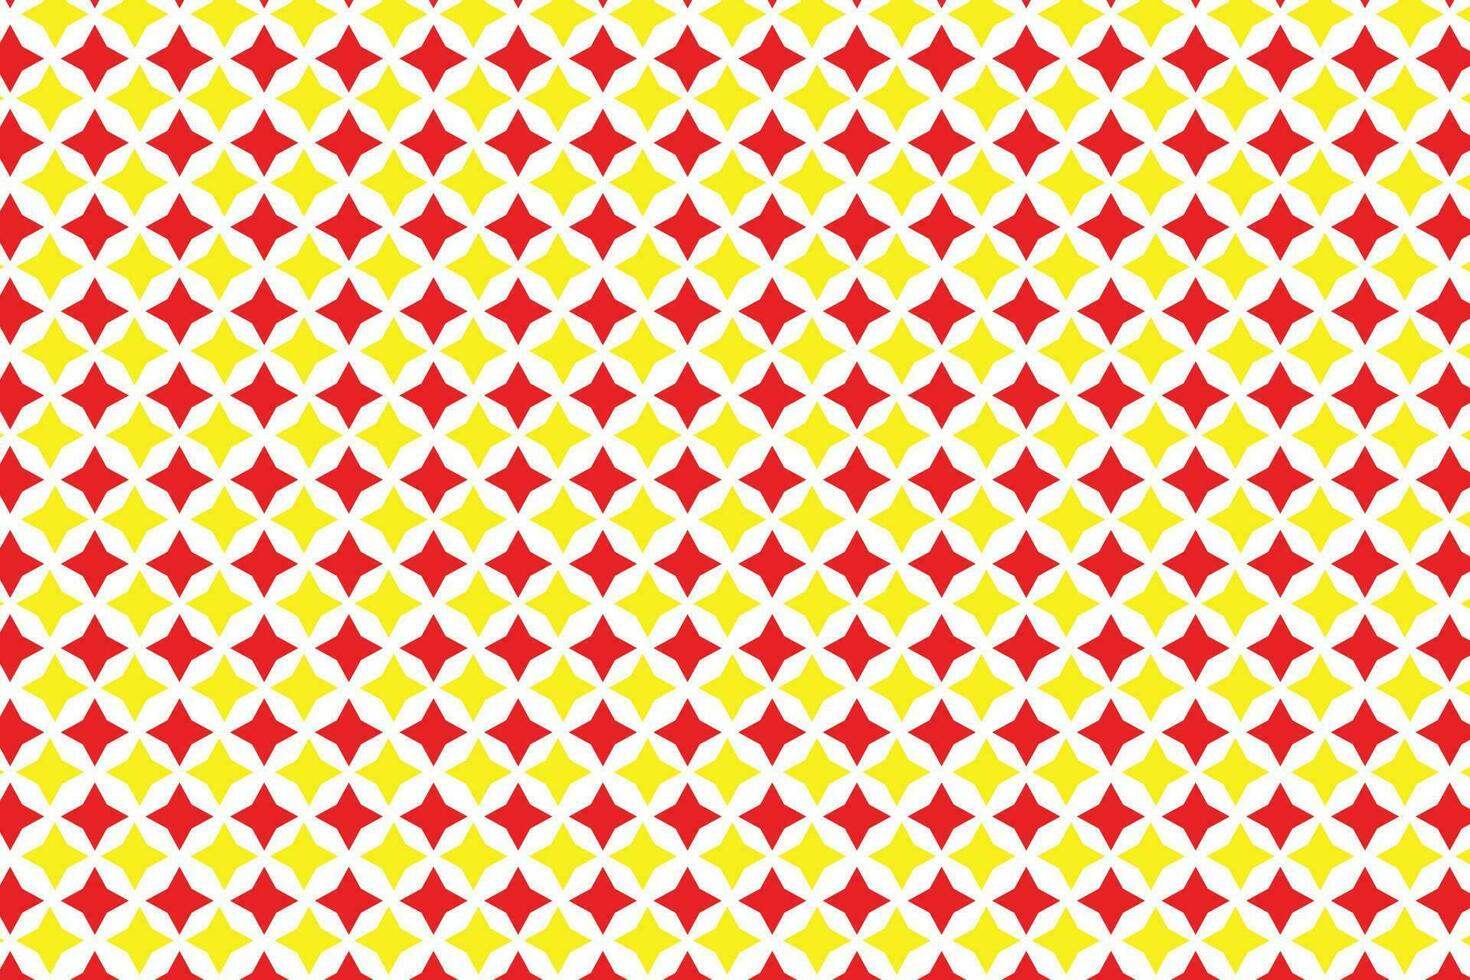 simple abstract seamlees red and yellow colour star pattern on white background vector